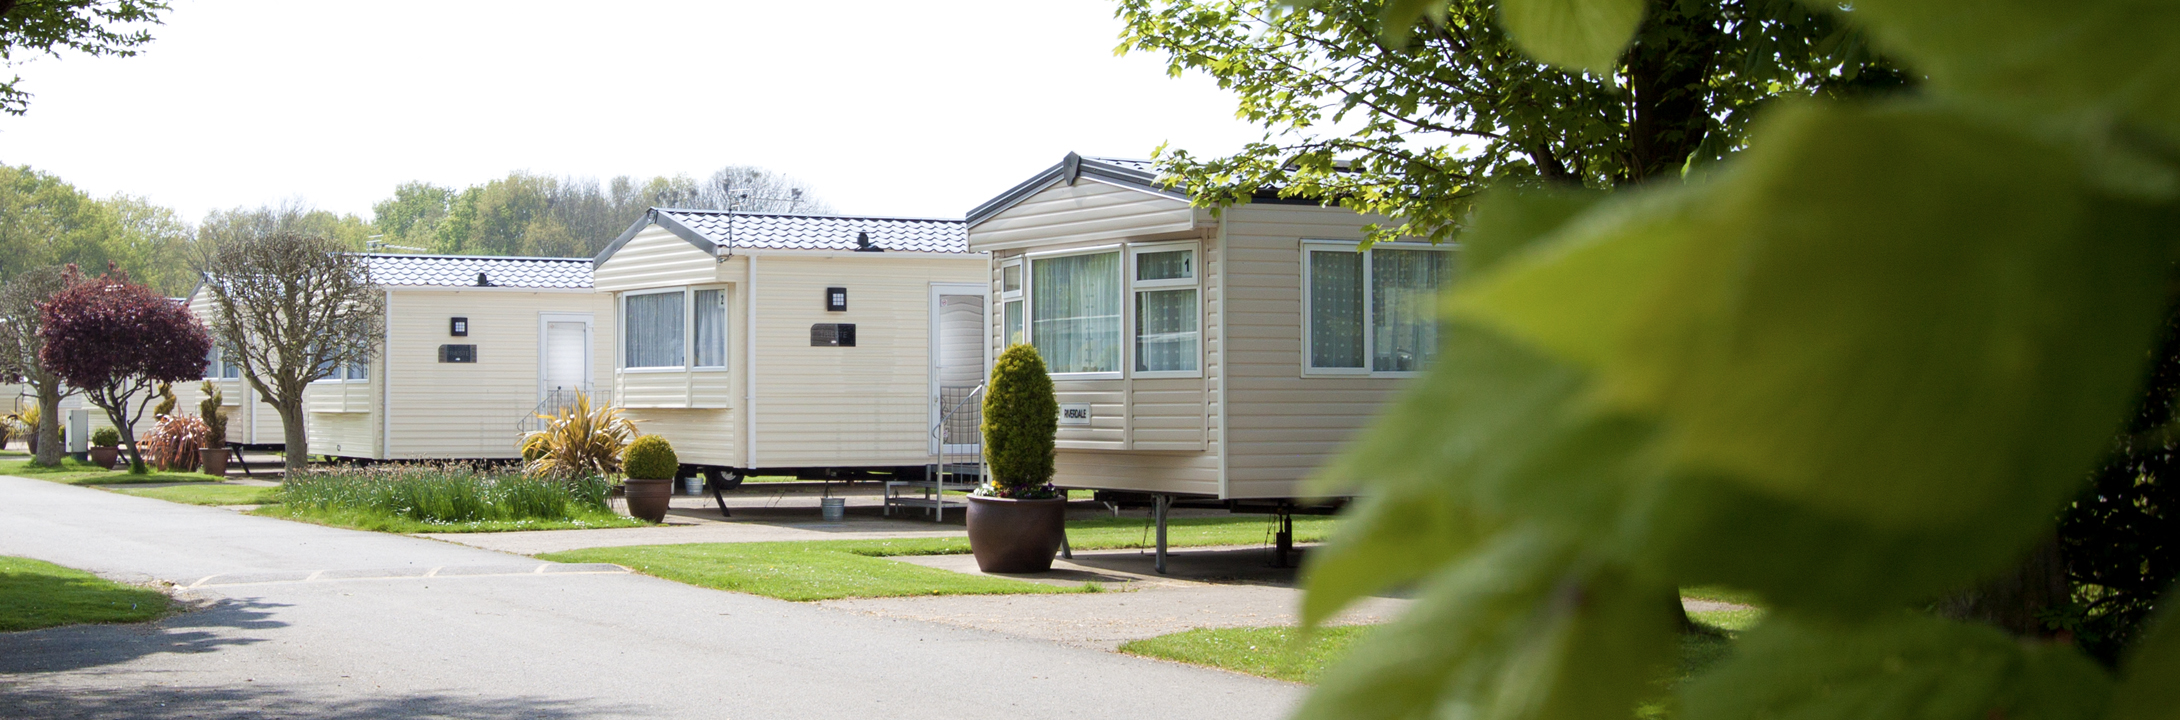 holiday cottages lincolnshire, touring & camping site lincolnshire, lodge holidays near lincoln